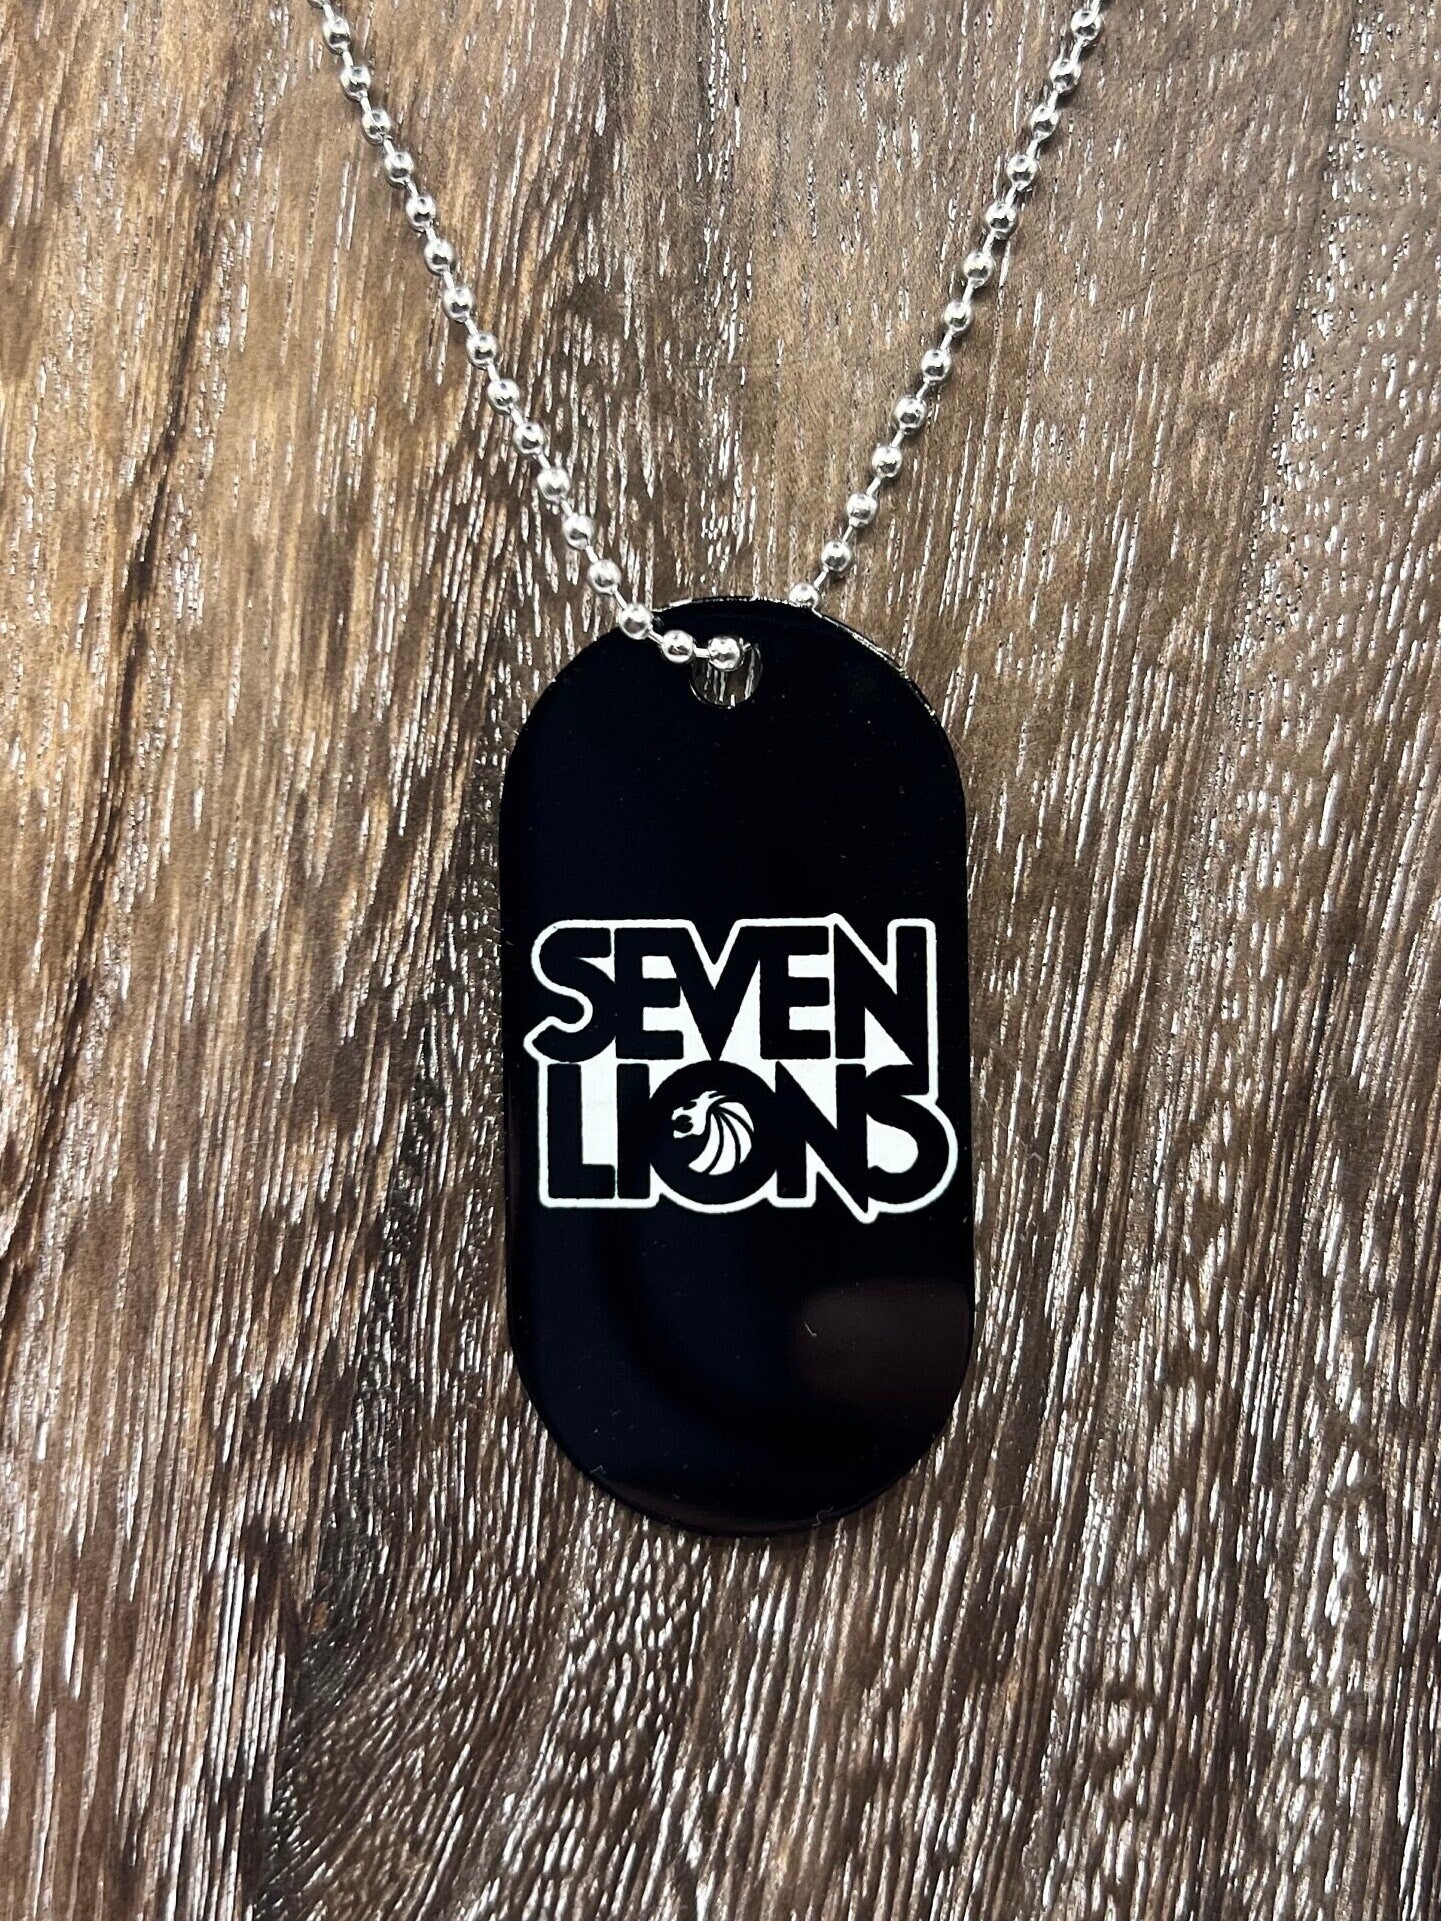 Seven Lions Necklace Dogtag Chain Double Sided  Dubstep Rave EDM DJ Producer Bass trippy Riddim Metal